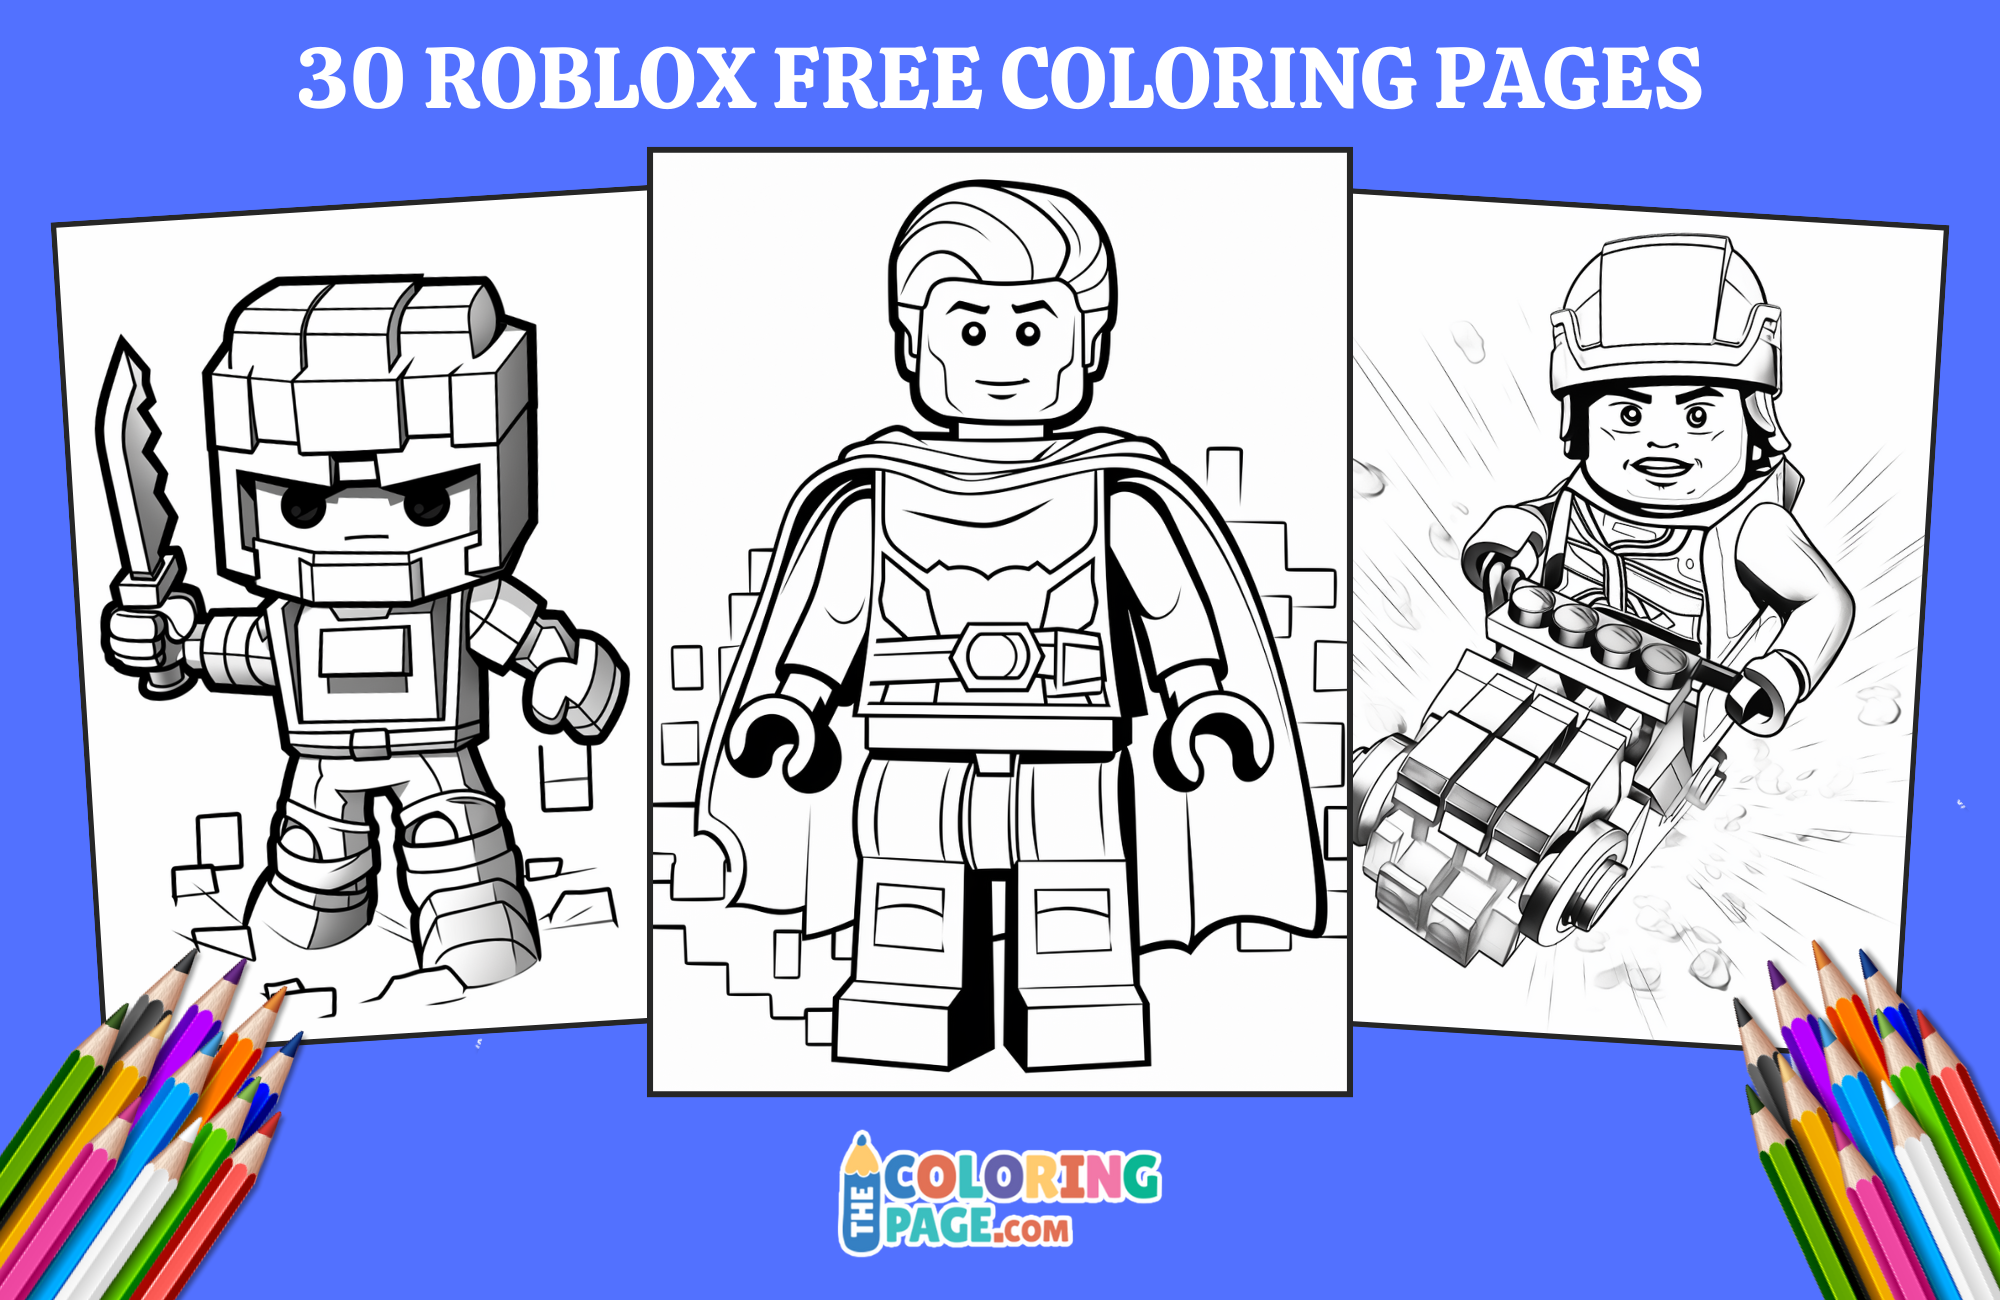 30 Free Roblox Coloring Pages